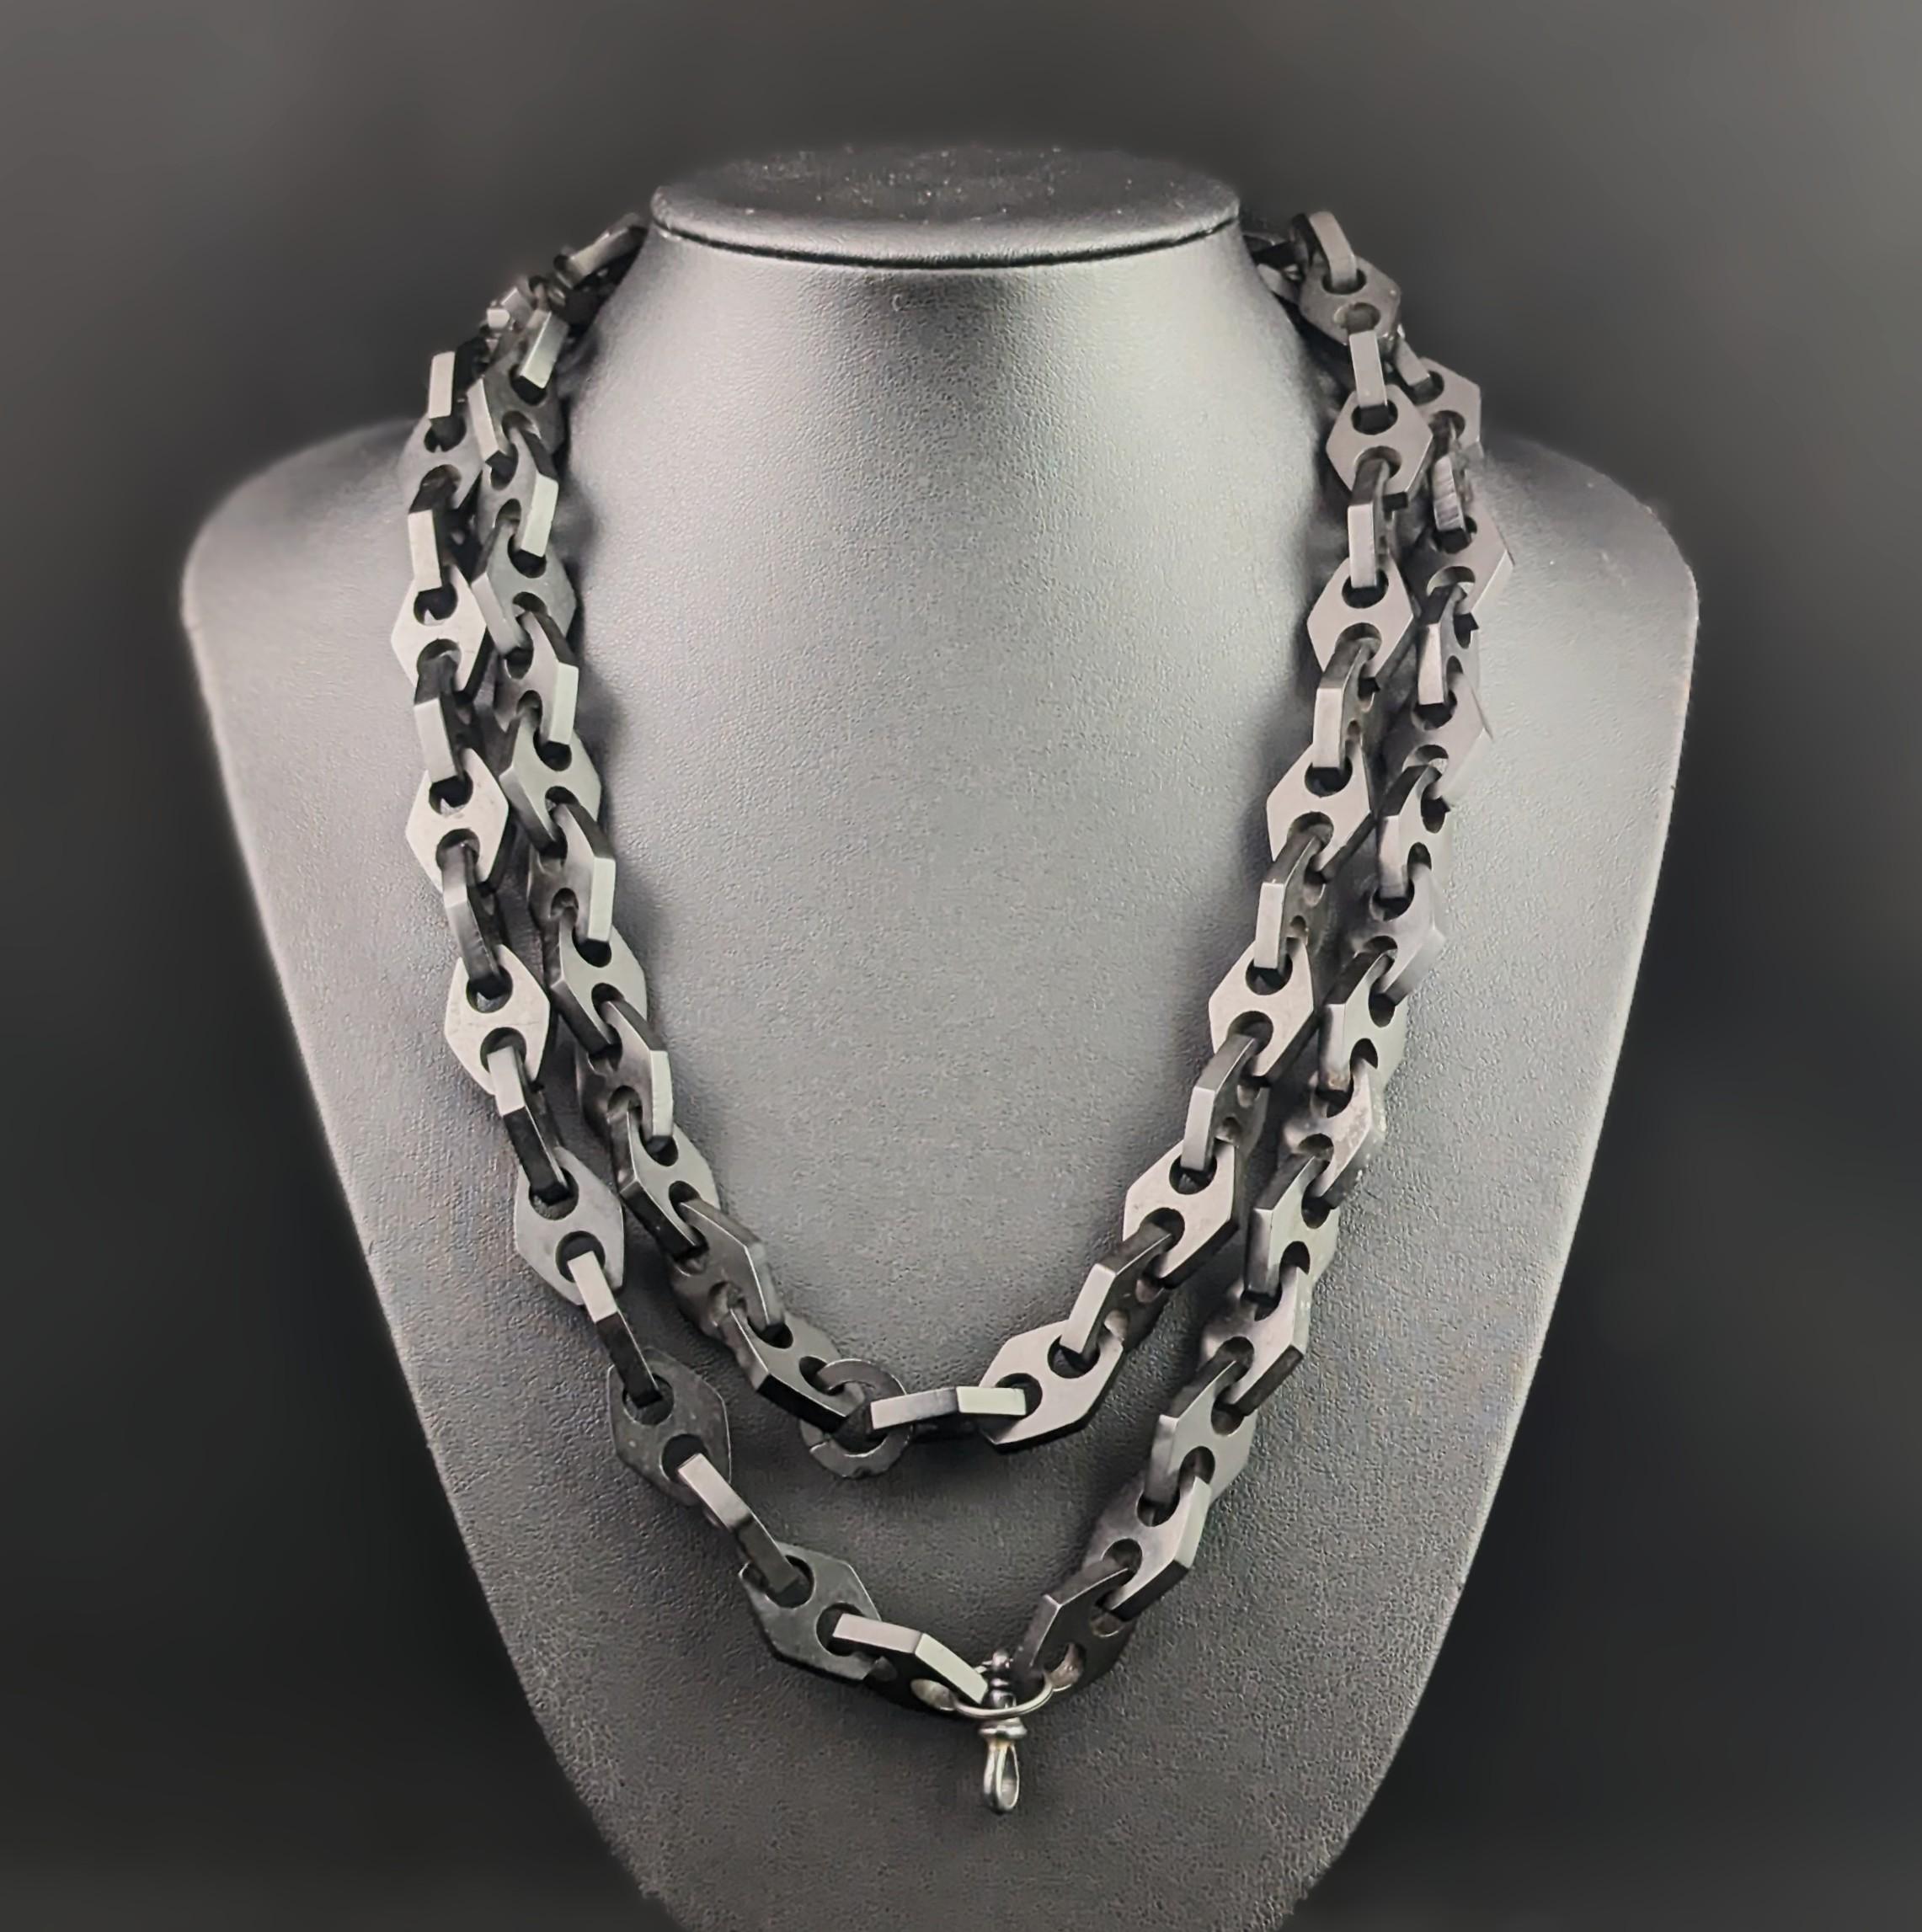 You can't fail to be enchanted by this beautiful, rare antique Victorian vulcanite longuard chain necklace.

It has chunky rounded diamond shaped links in rich inky black vulcanite, the necklace is an unusually long length for such a chunky piece,